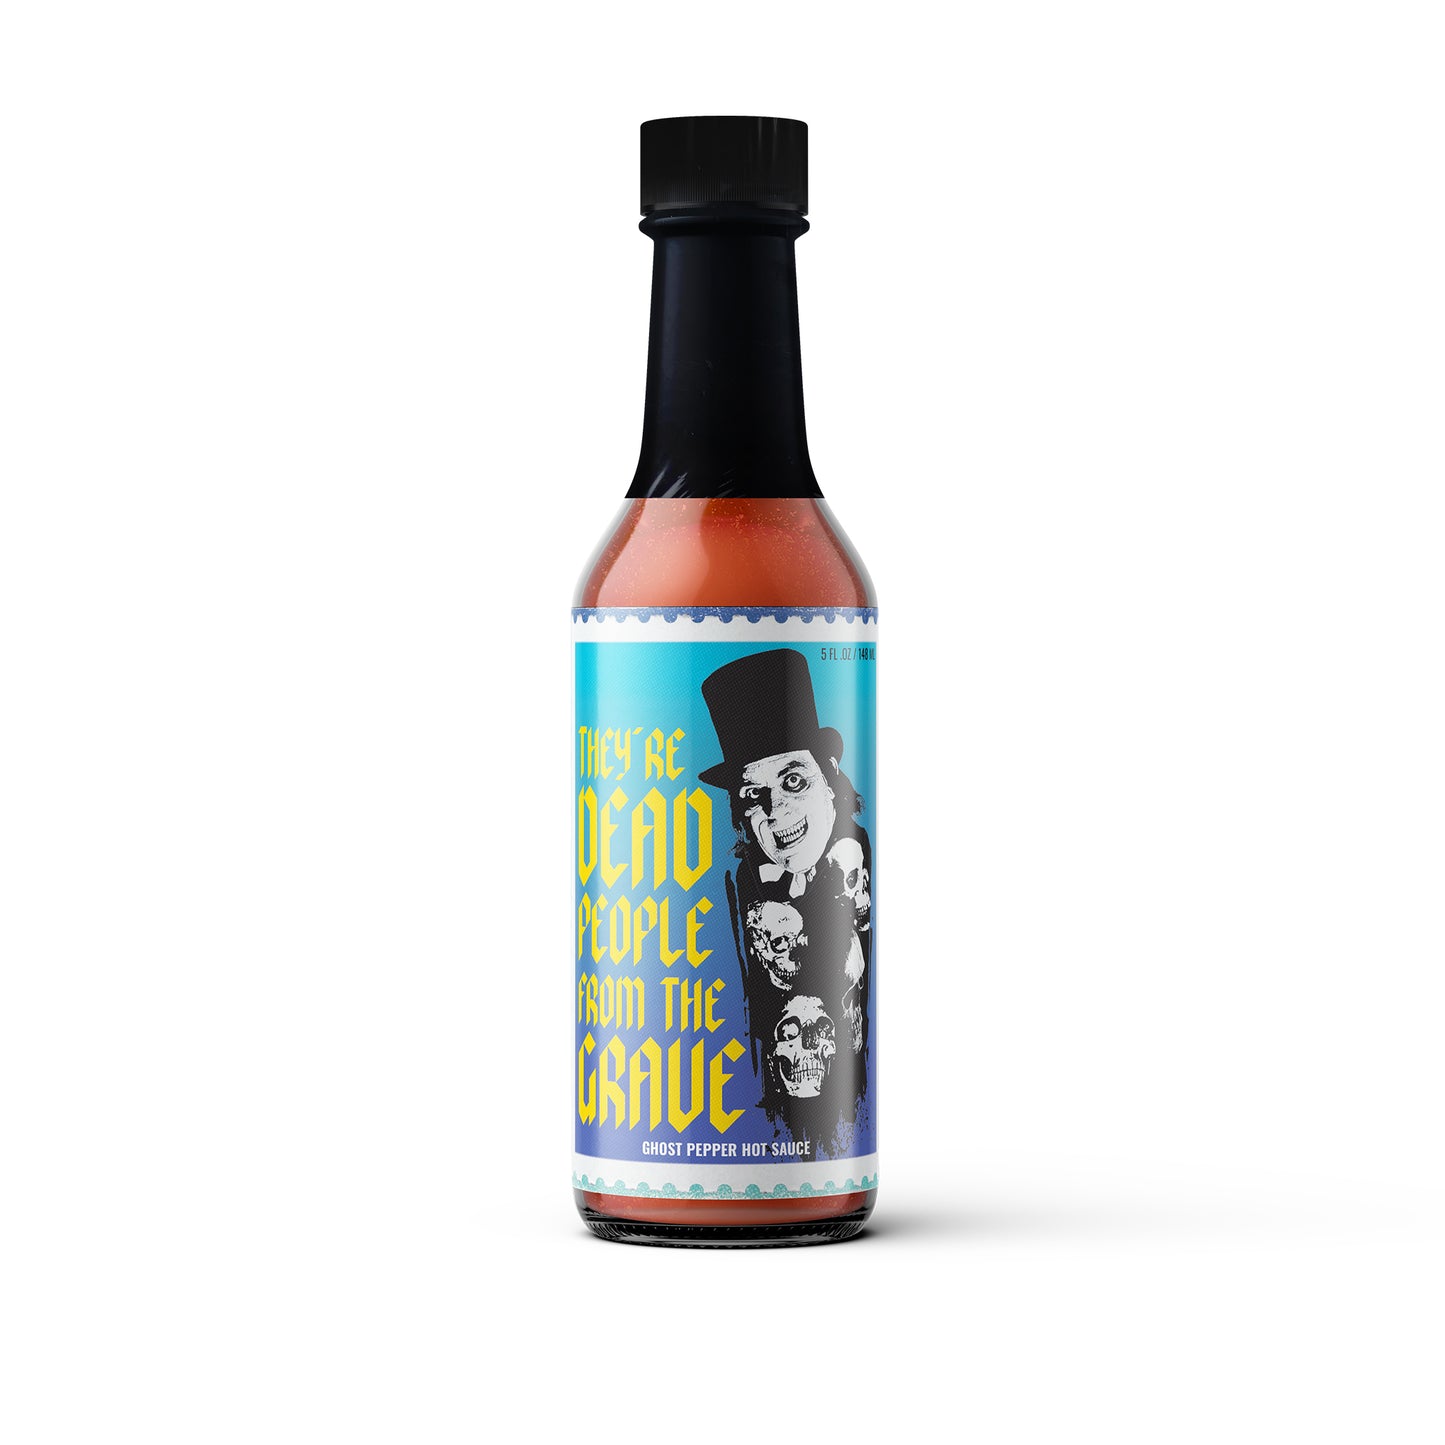 They're Dead People From the Grave : Ghost Pepper Hot Sauce